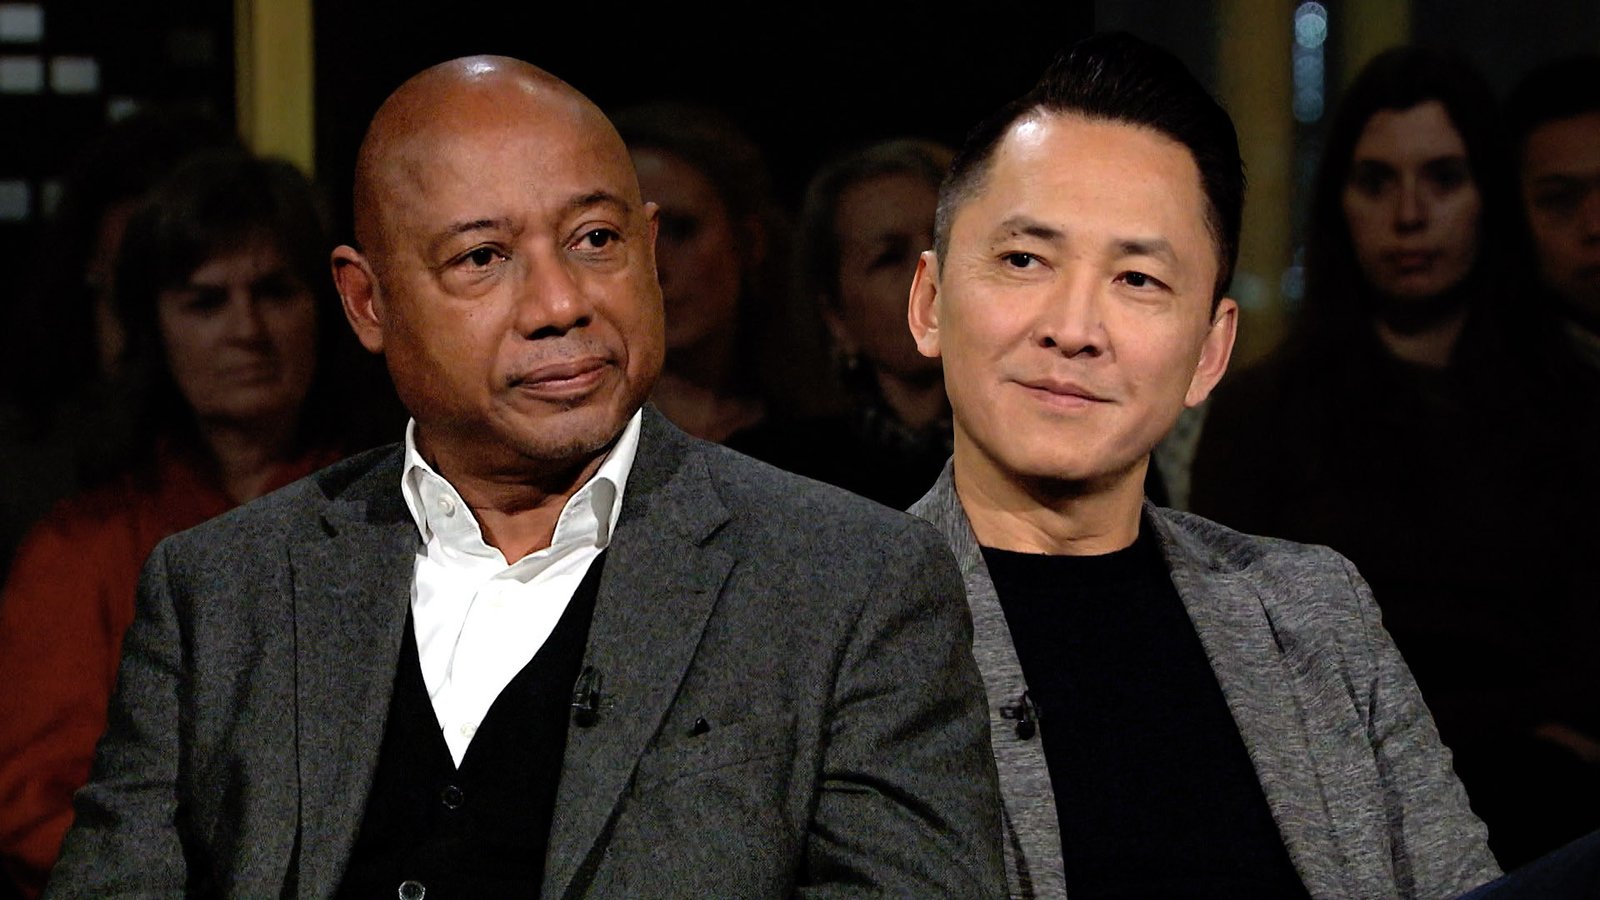 Art violence and resistance Raoul Peck and Viet Thanh Nguyen | Al Jazeera